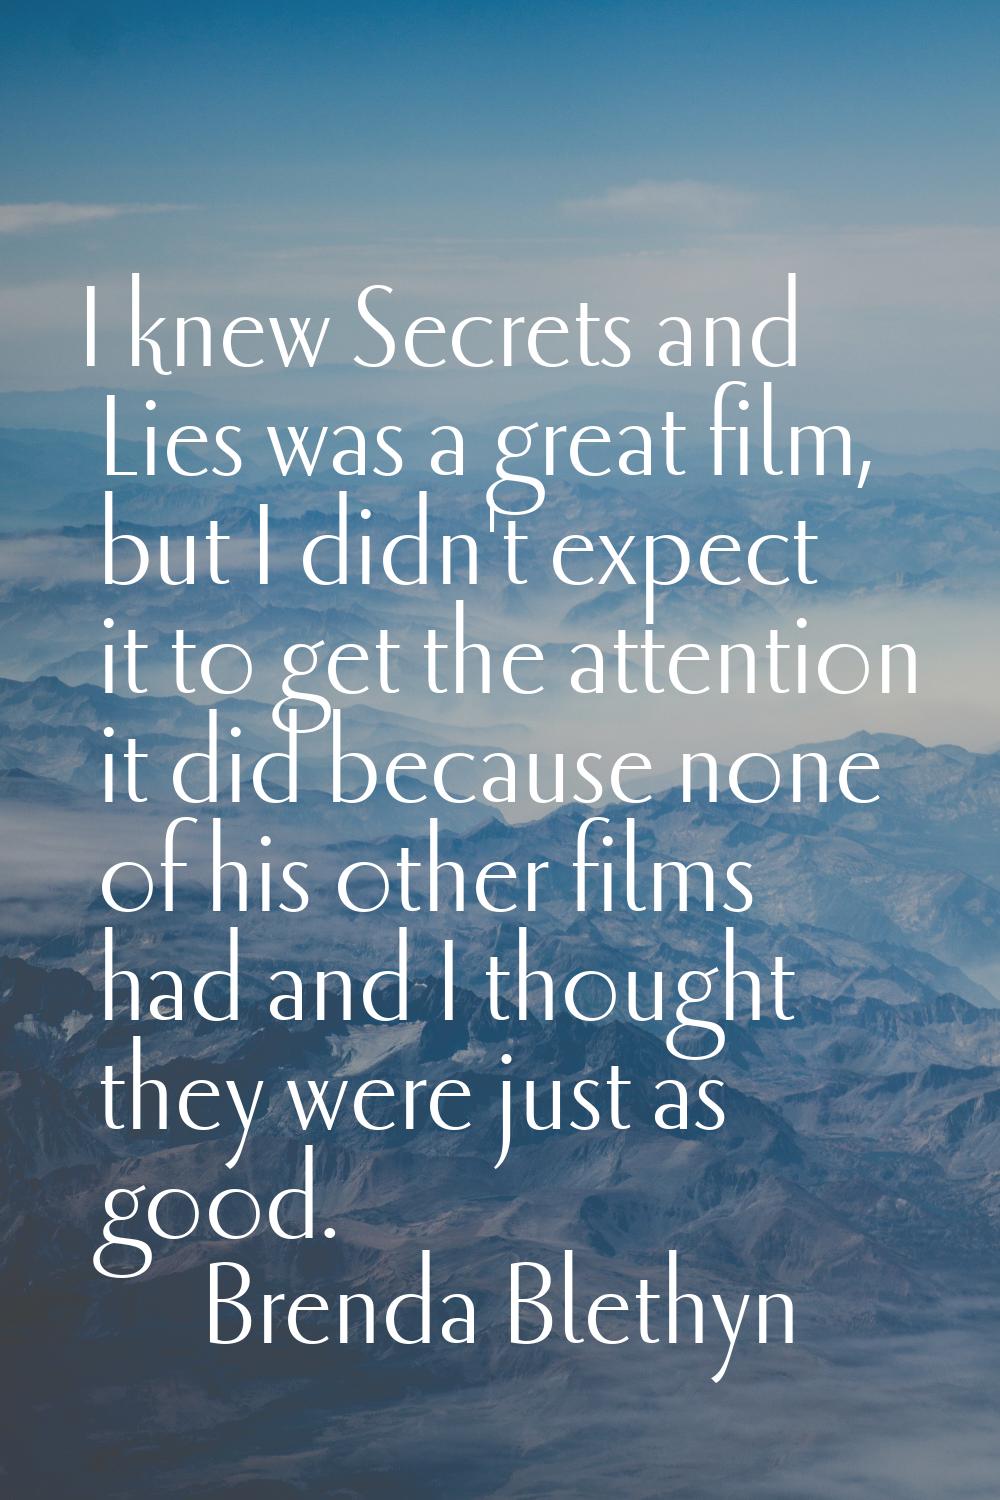 I knew Secrets and Lies was a great film, but I didn't expect it to get the attention it did becaus